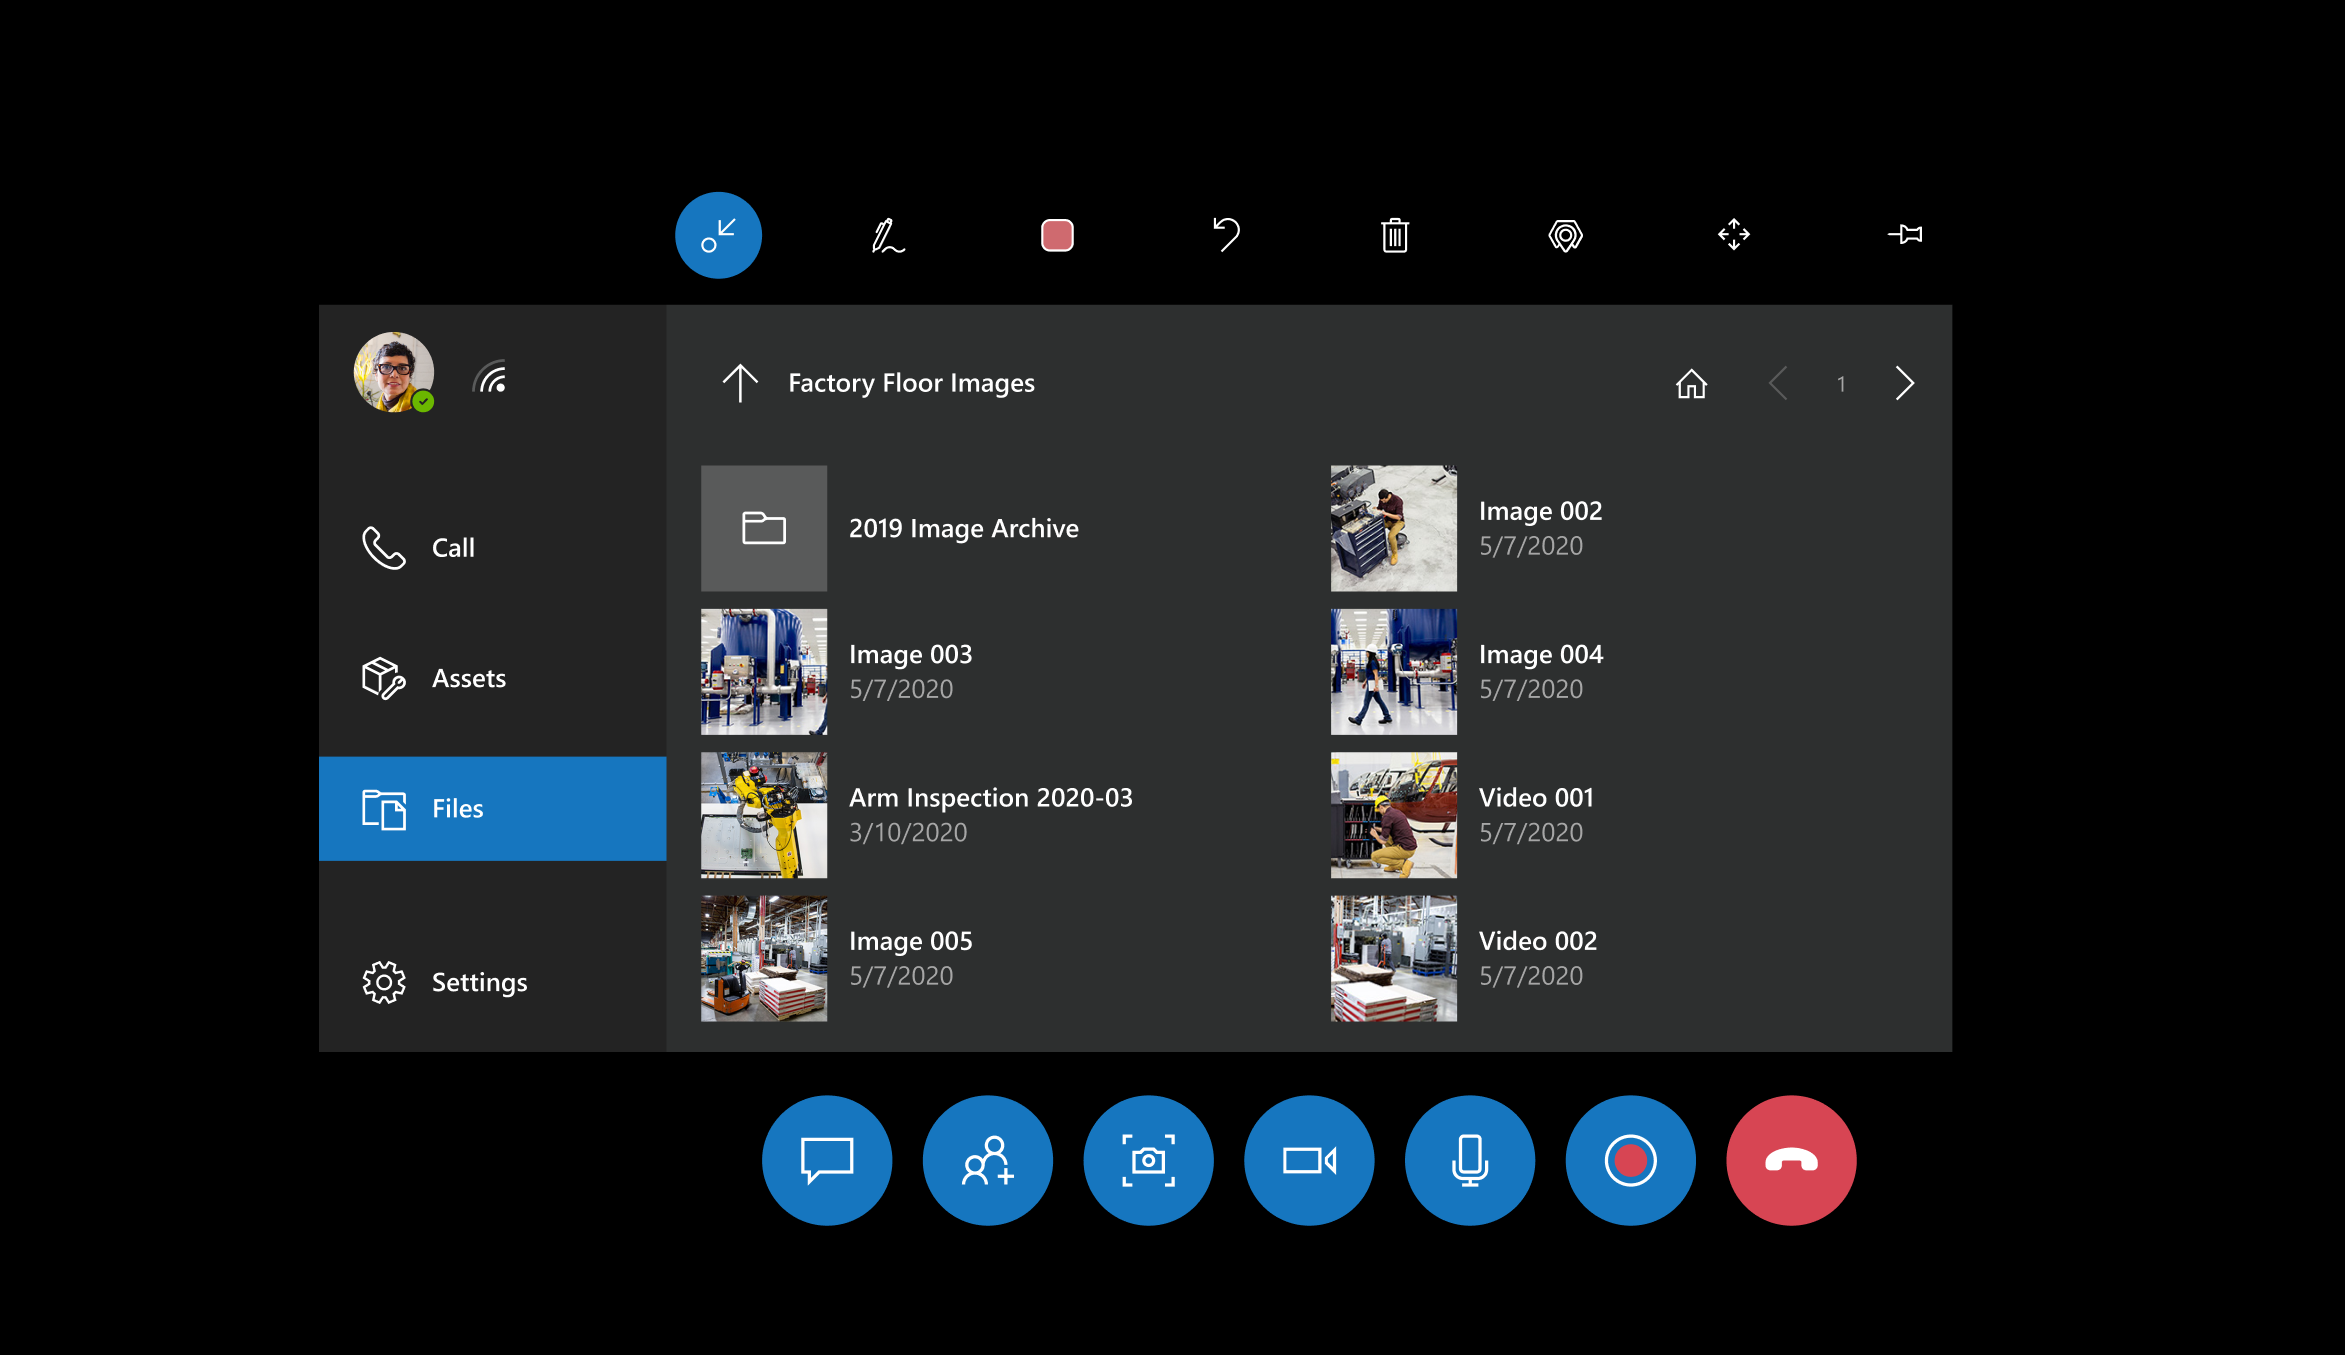 Screenshot of the HoloLens field of view, showing the Files tab screen.